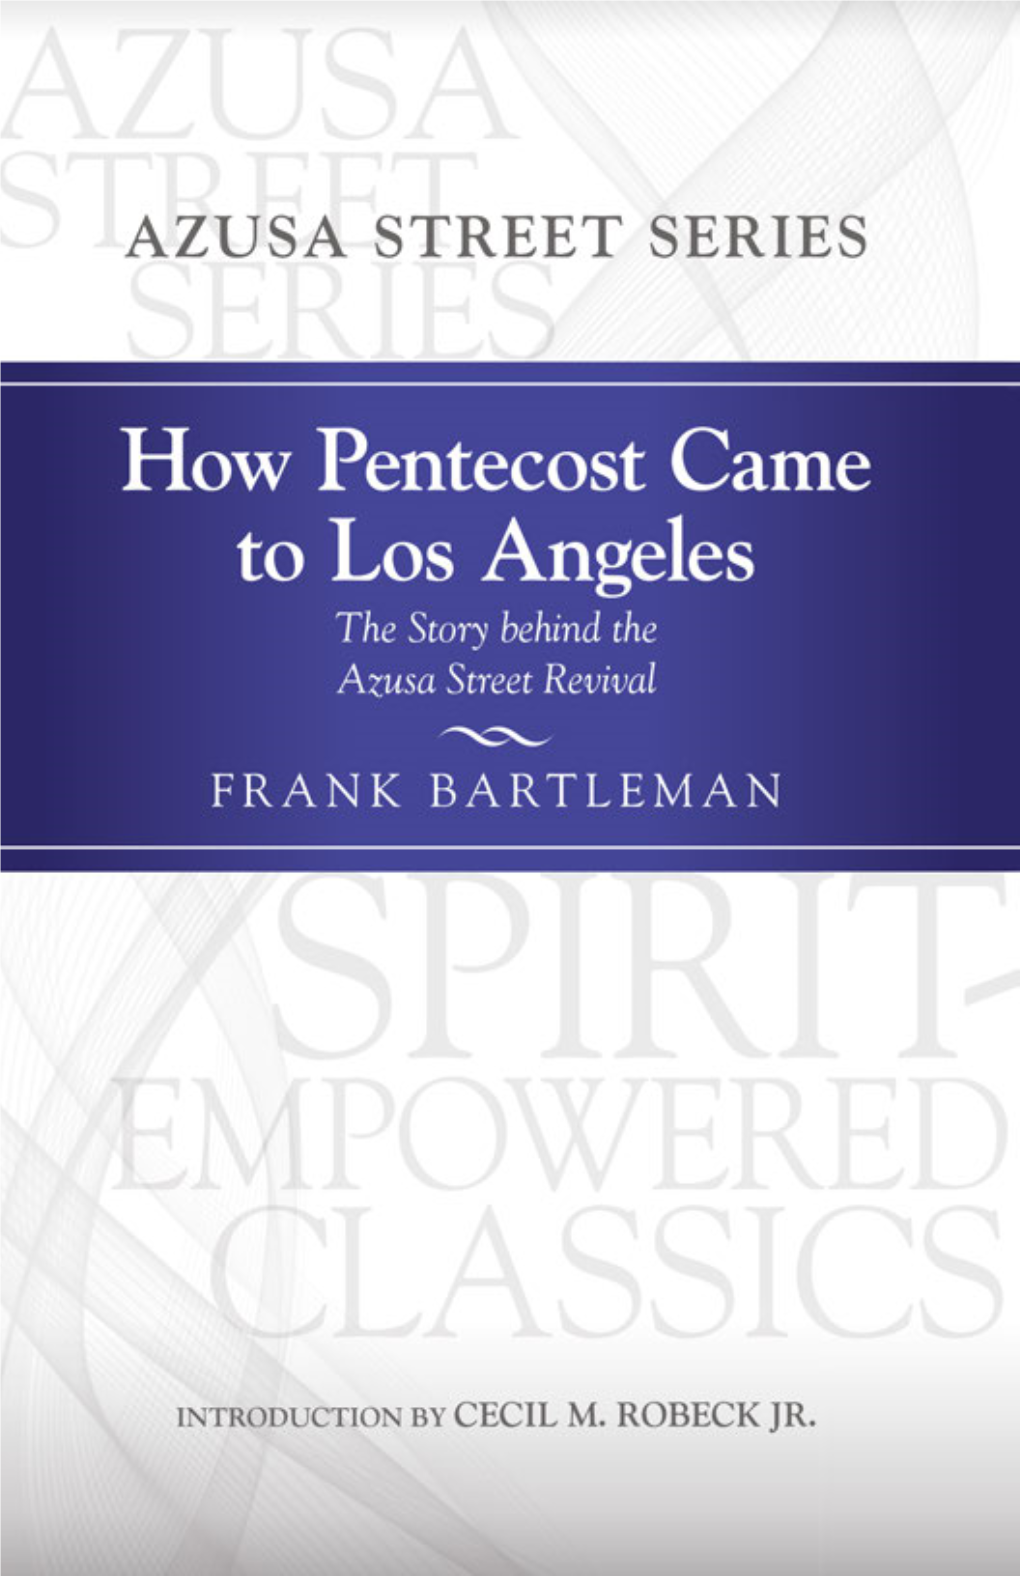 How Pentecost Came to Los Angeles the Story Behind the Azusa Street Revival